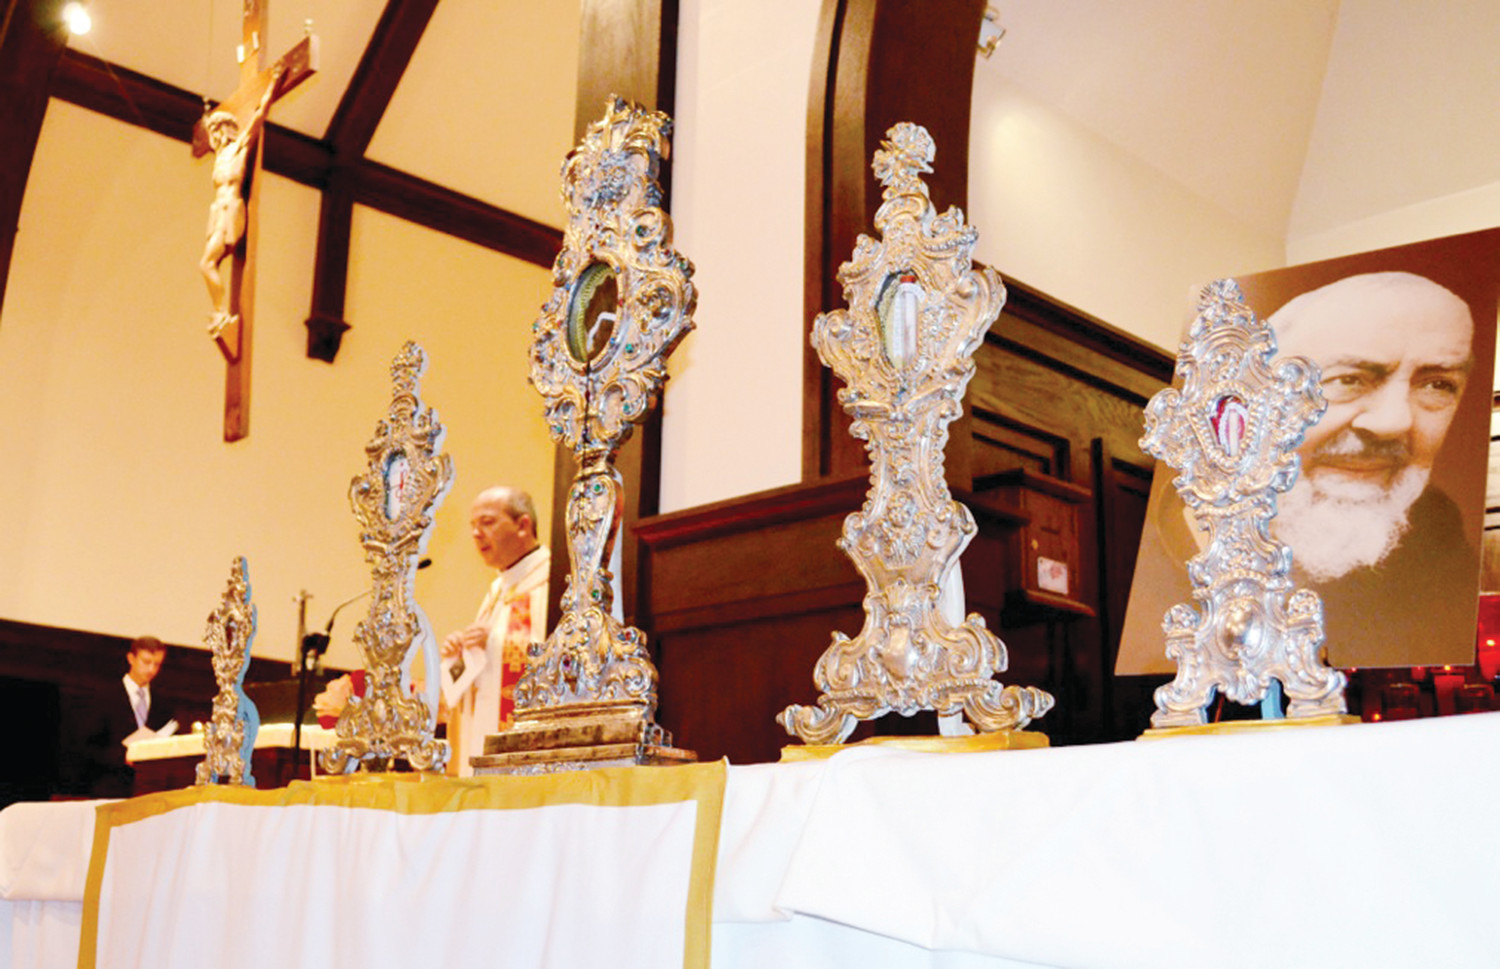 Relics of Padre Pio are showcased at St. Thomas More Church in Narragansett as Father Marcel Taillon, pastor, offers prayers during the stop on the national tour of St. Pio’s relics.